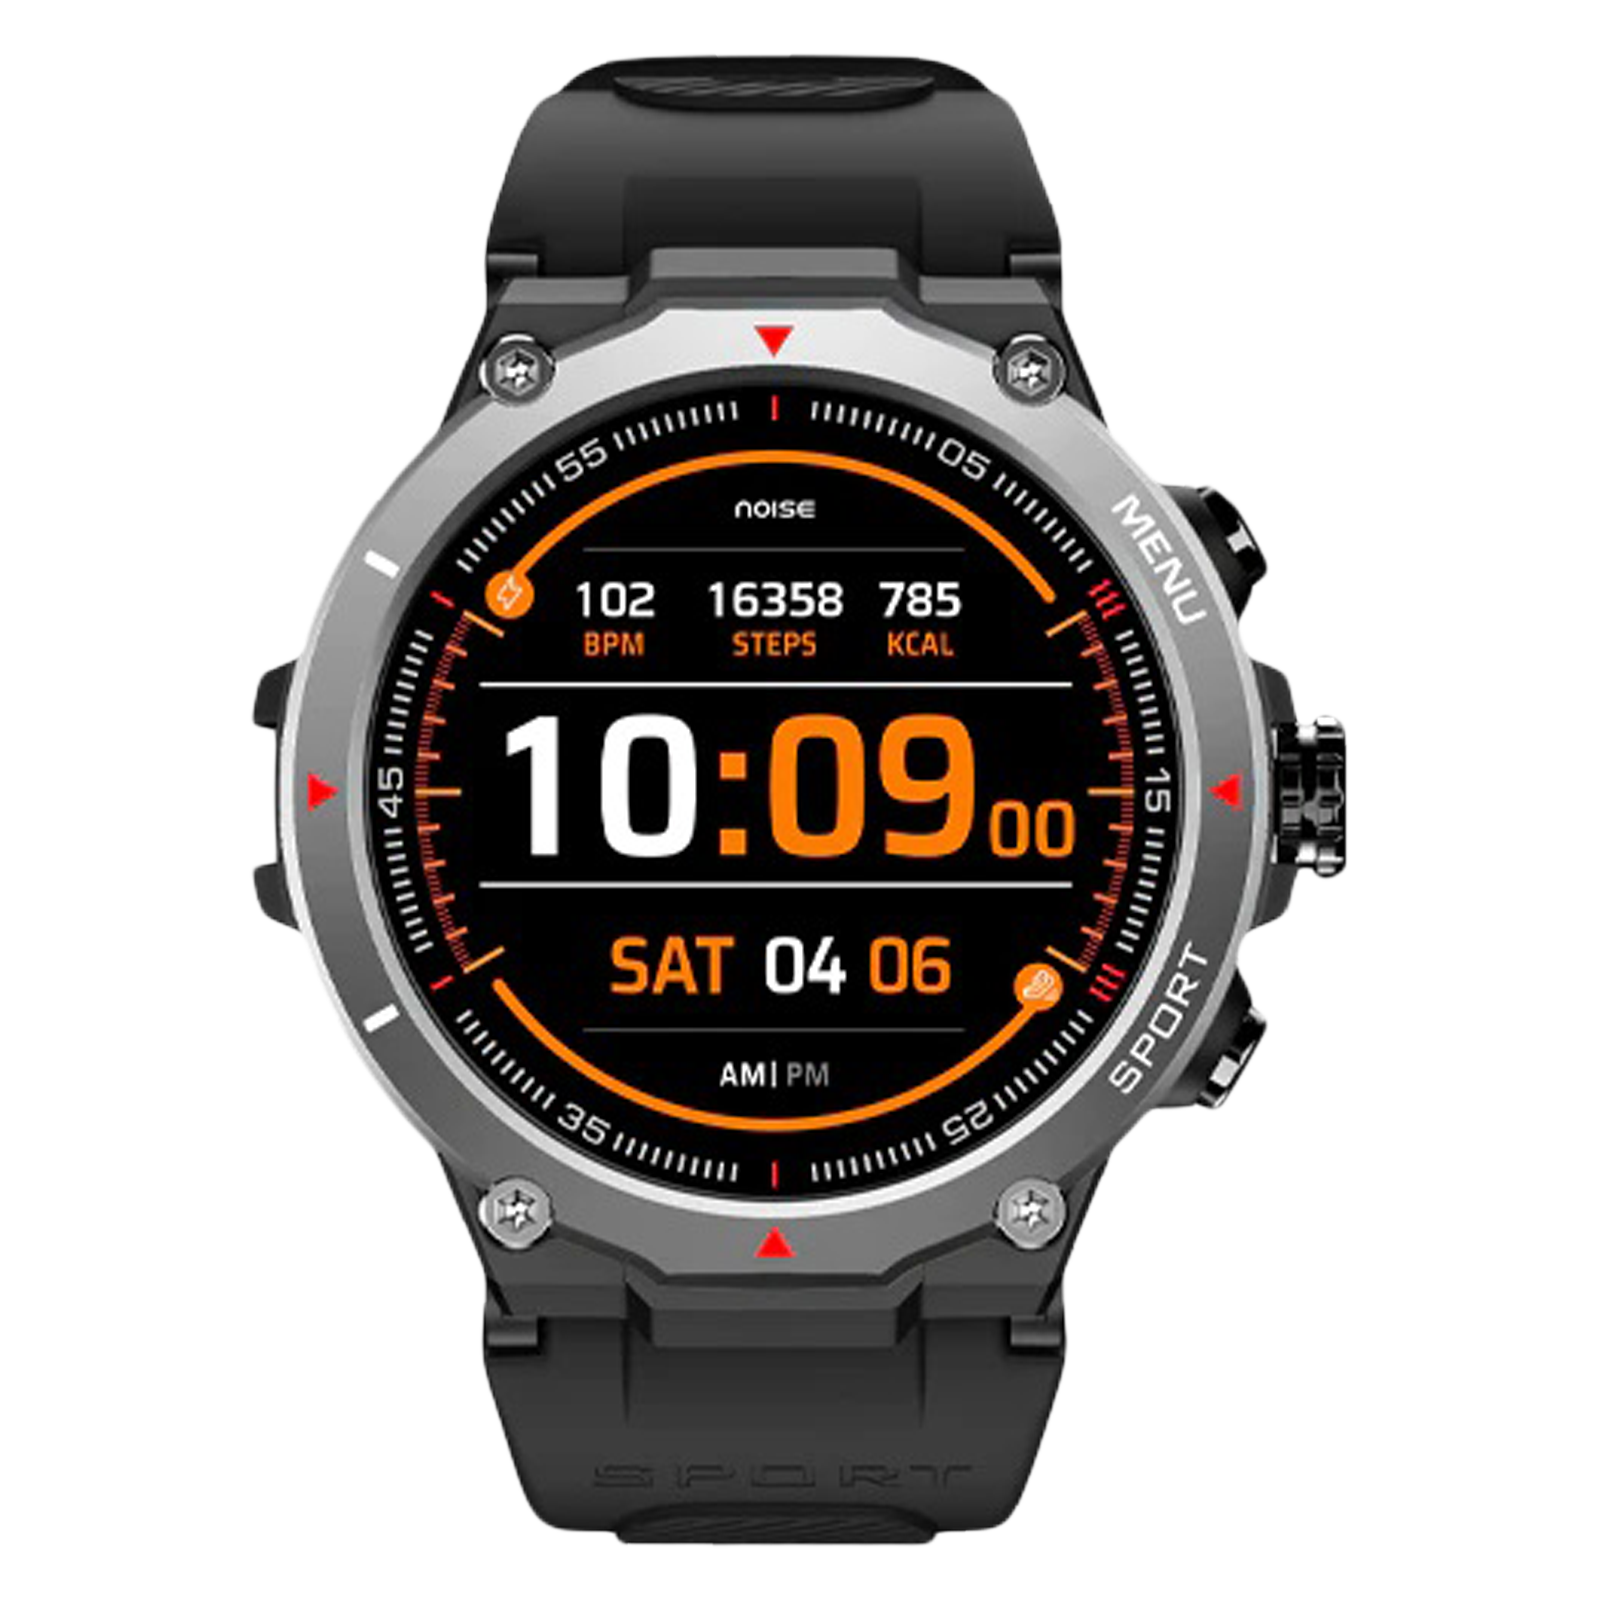 Noise Vortex Smartwatch with an AMOLED Display Announced | Beebom